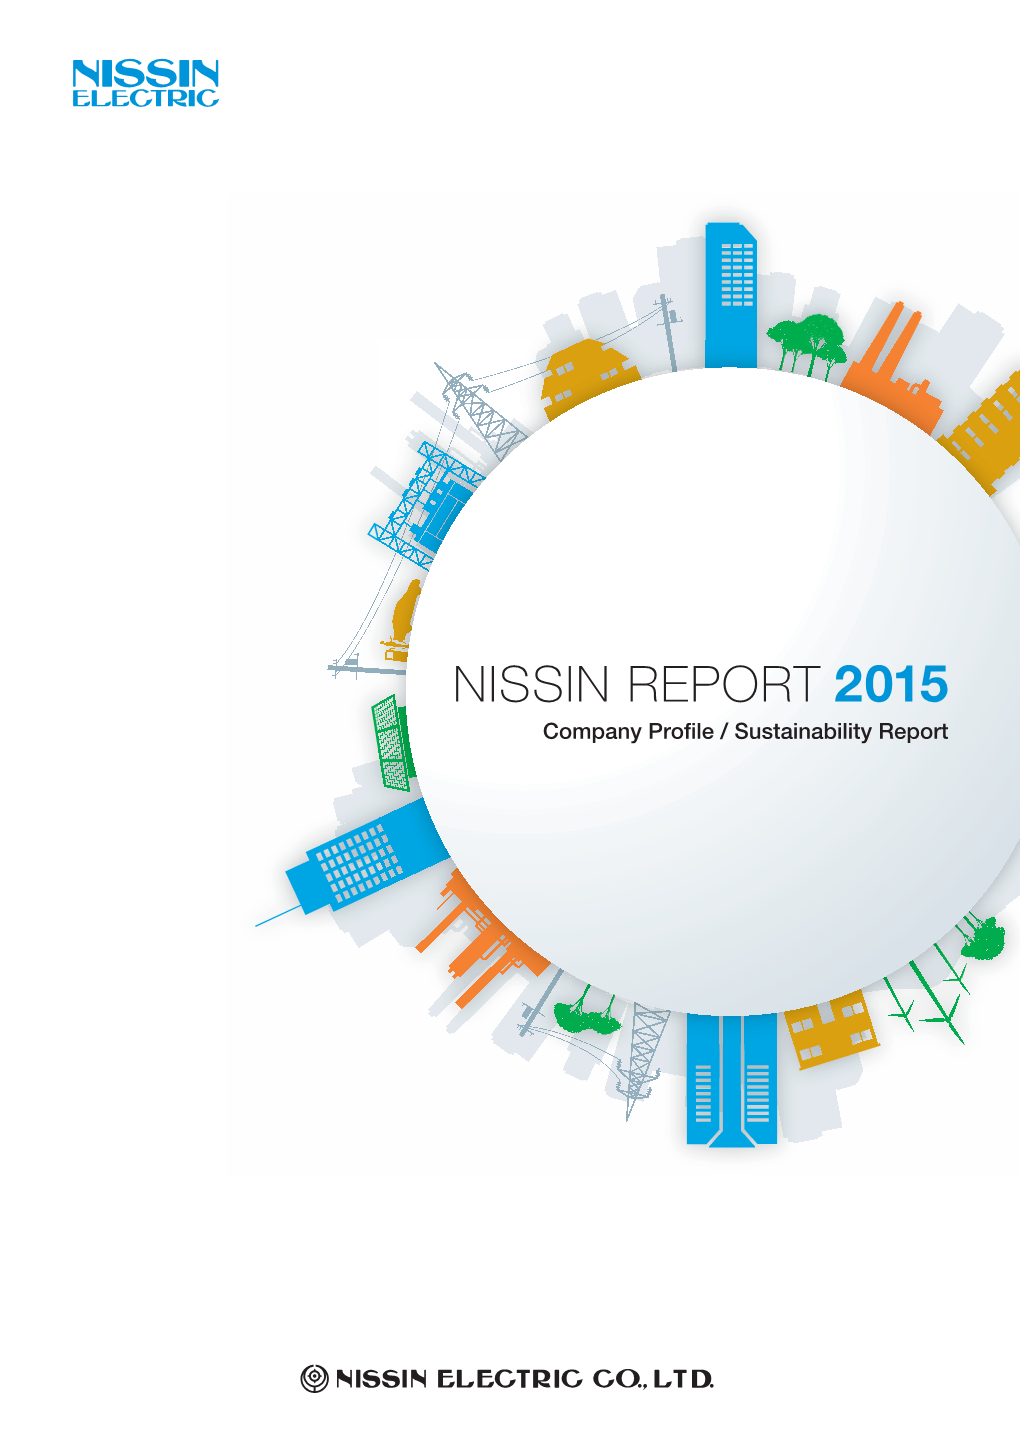 NISSIN REPORT 2015 Company Profile / Sustainability Report CONTENTS Editorial Policy